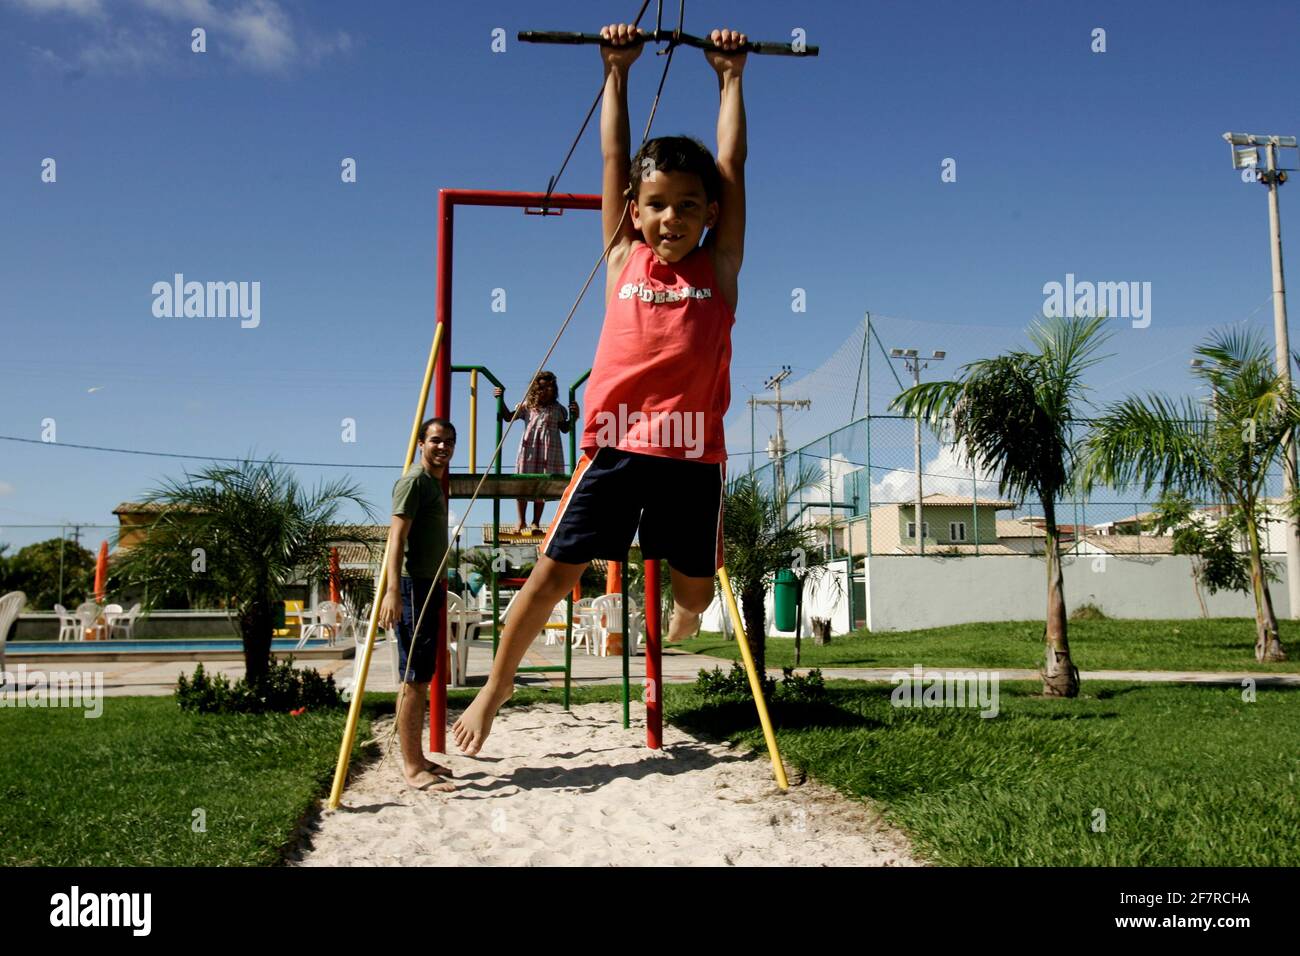 salvador, bahia / brazil - june 27, 2009: child is seen playing on zip lines in a condominium boat in the city of Salvador. Stock Photo